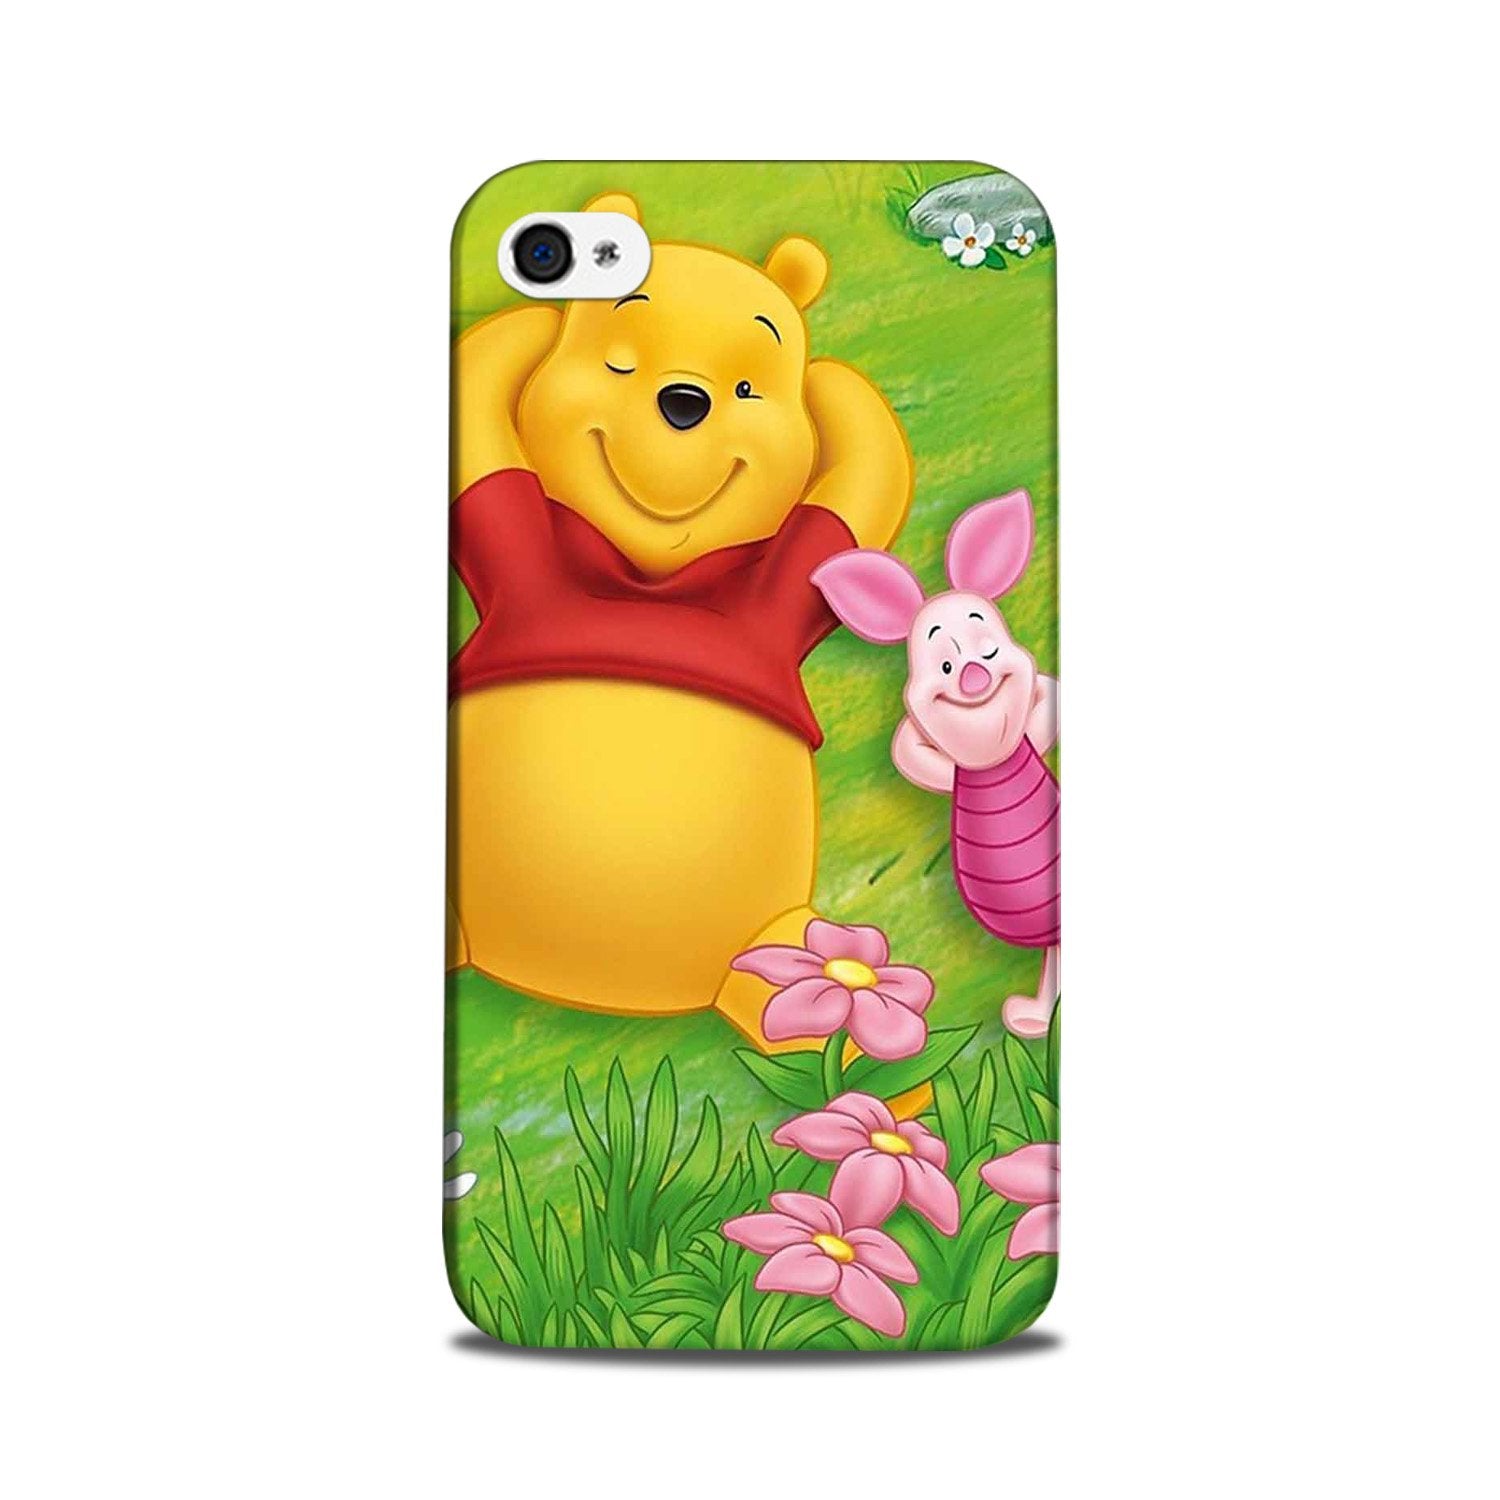 Winnie The Pooh Mobile Back Case for iPhone 5/ 5s  (Design - 348)